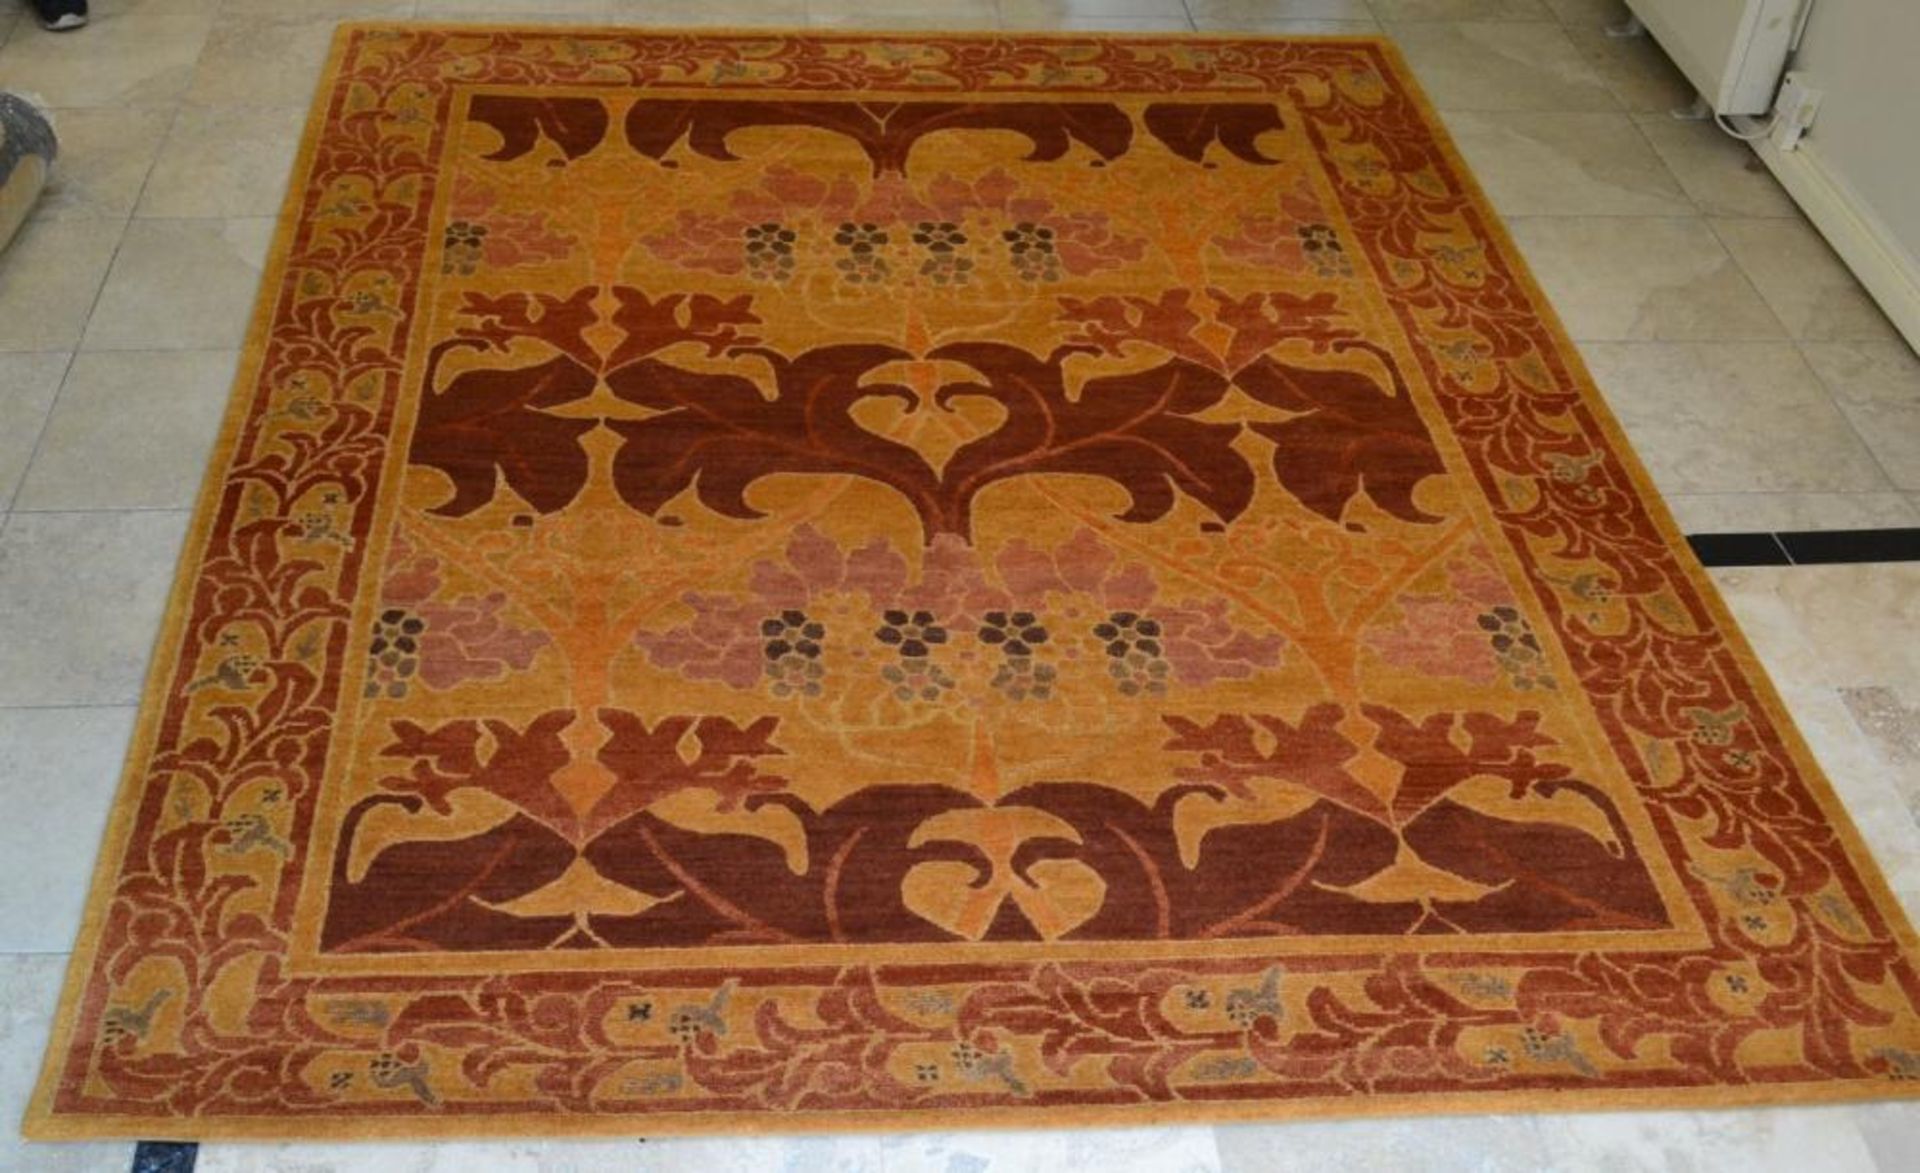 1 x Nepalese Terracotta Arts & Crafts Design Hand Knotted Rug - 100% Handspun Wool - Dimensions: - Image 16 of 18